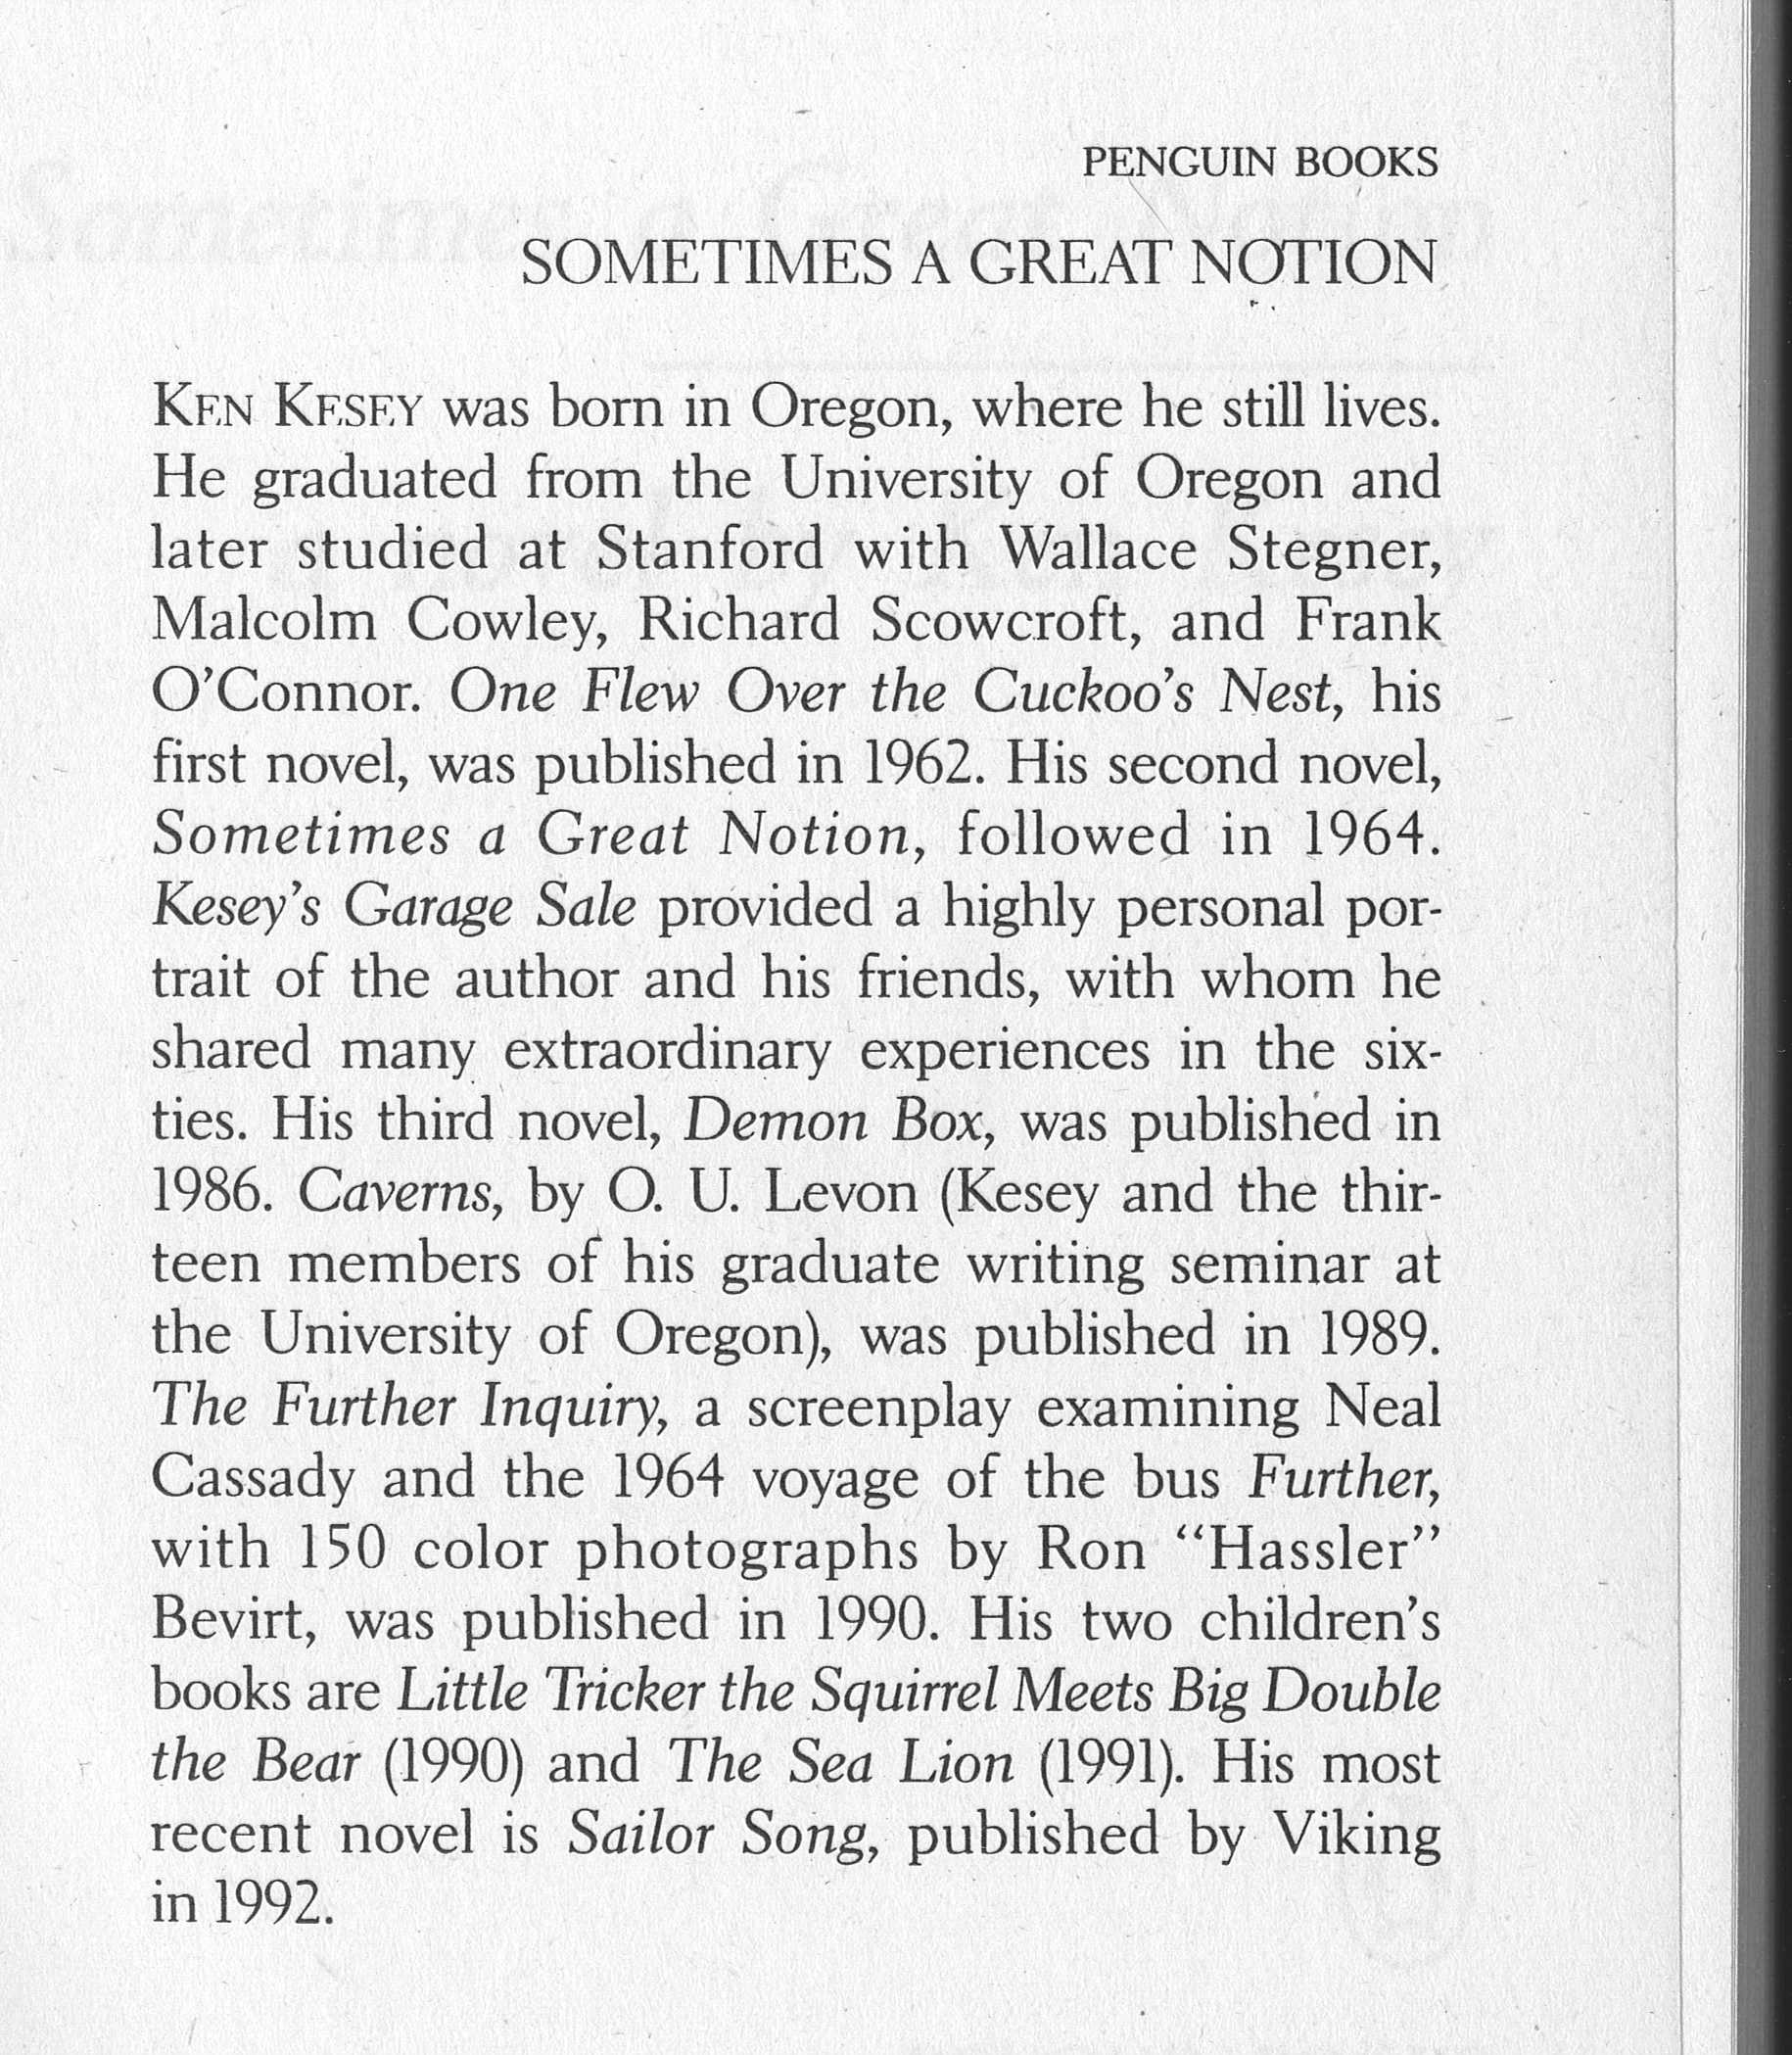 Photo of a page from the novel Sometimes a Great Notion, by author Ken Kesey. The page features the author's biographical information, including the mention that he was born in Oregon, which is incorrect. Kesey was born in La Junta, Colorado.